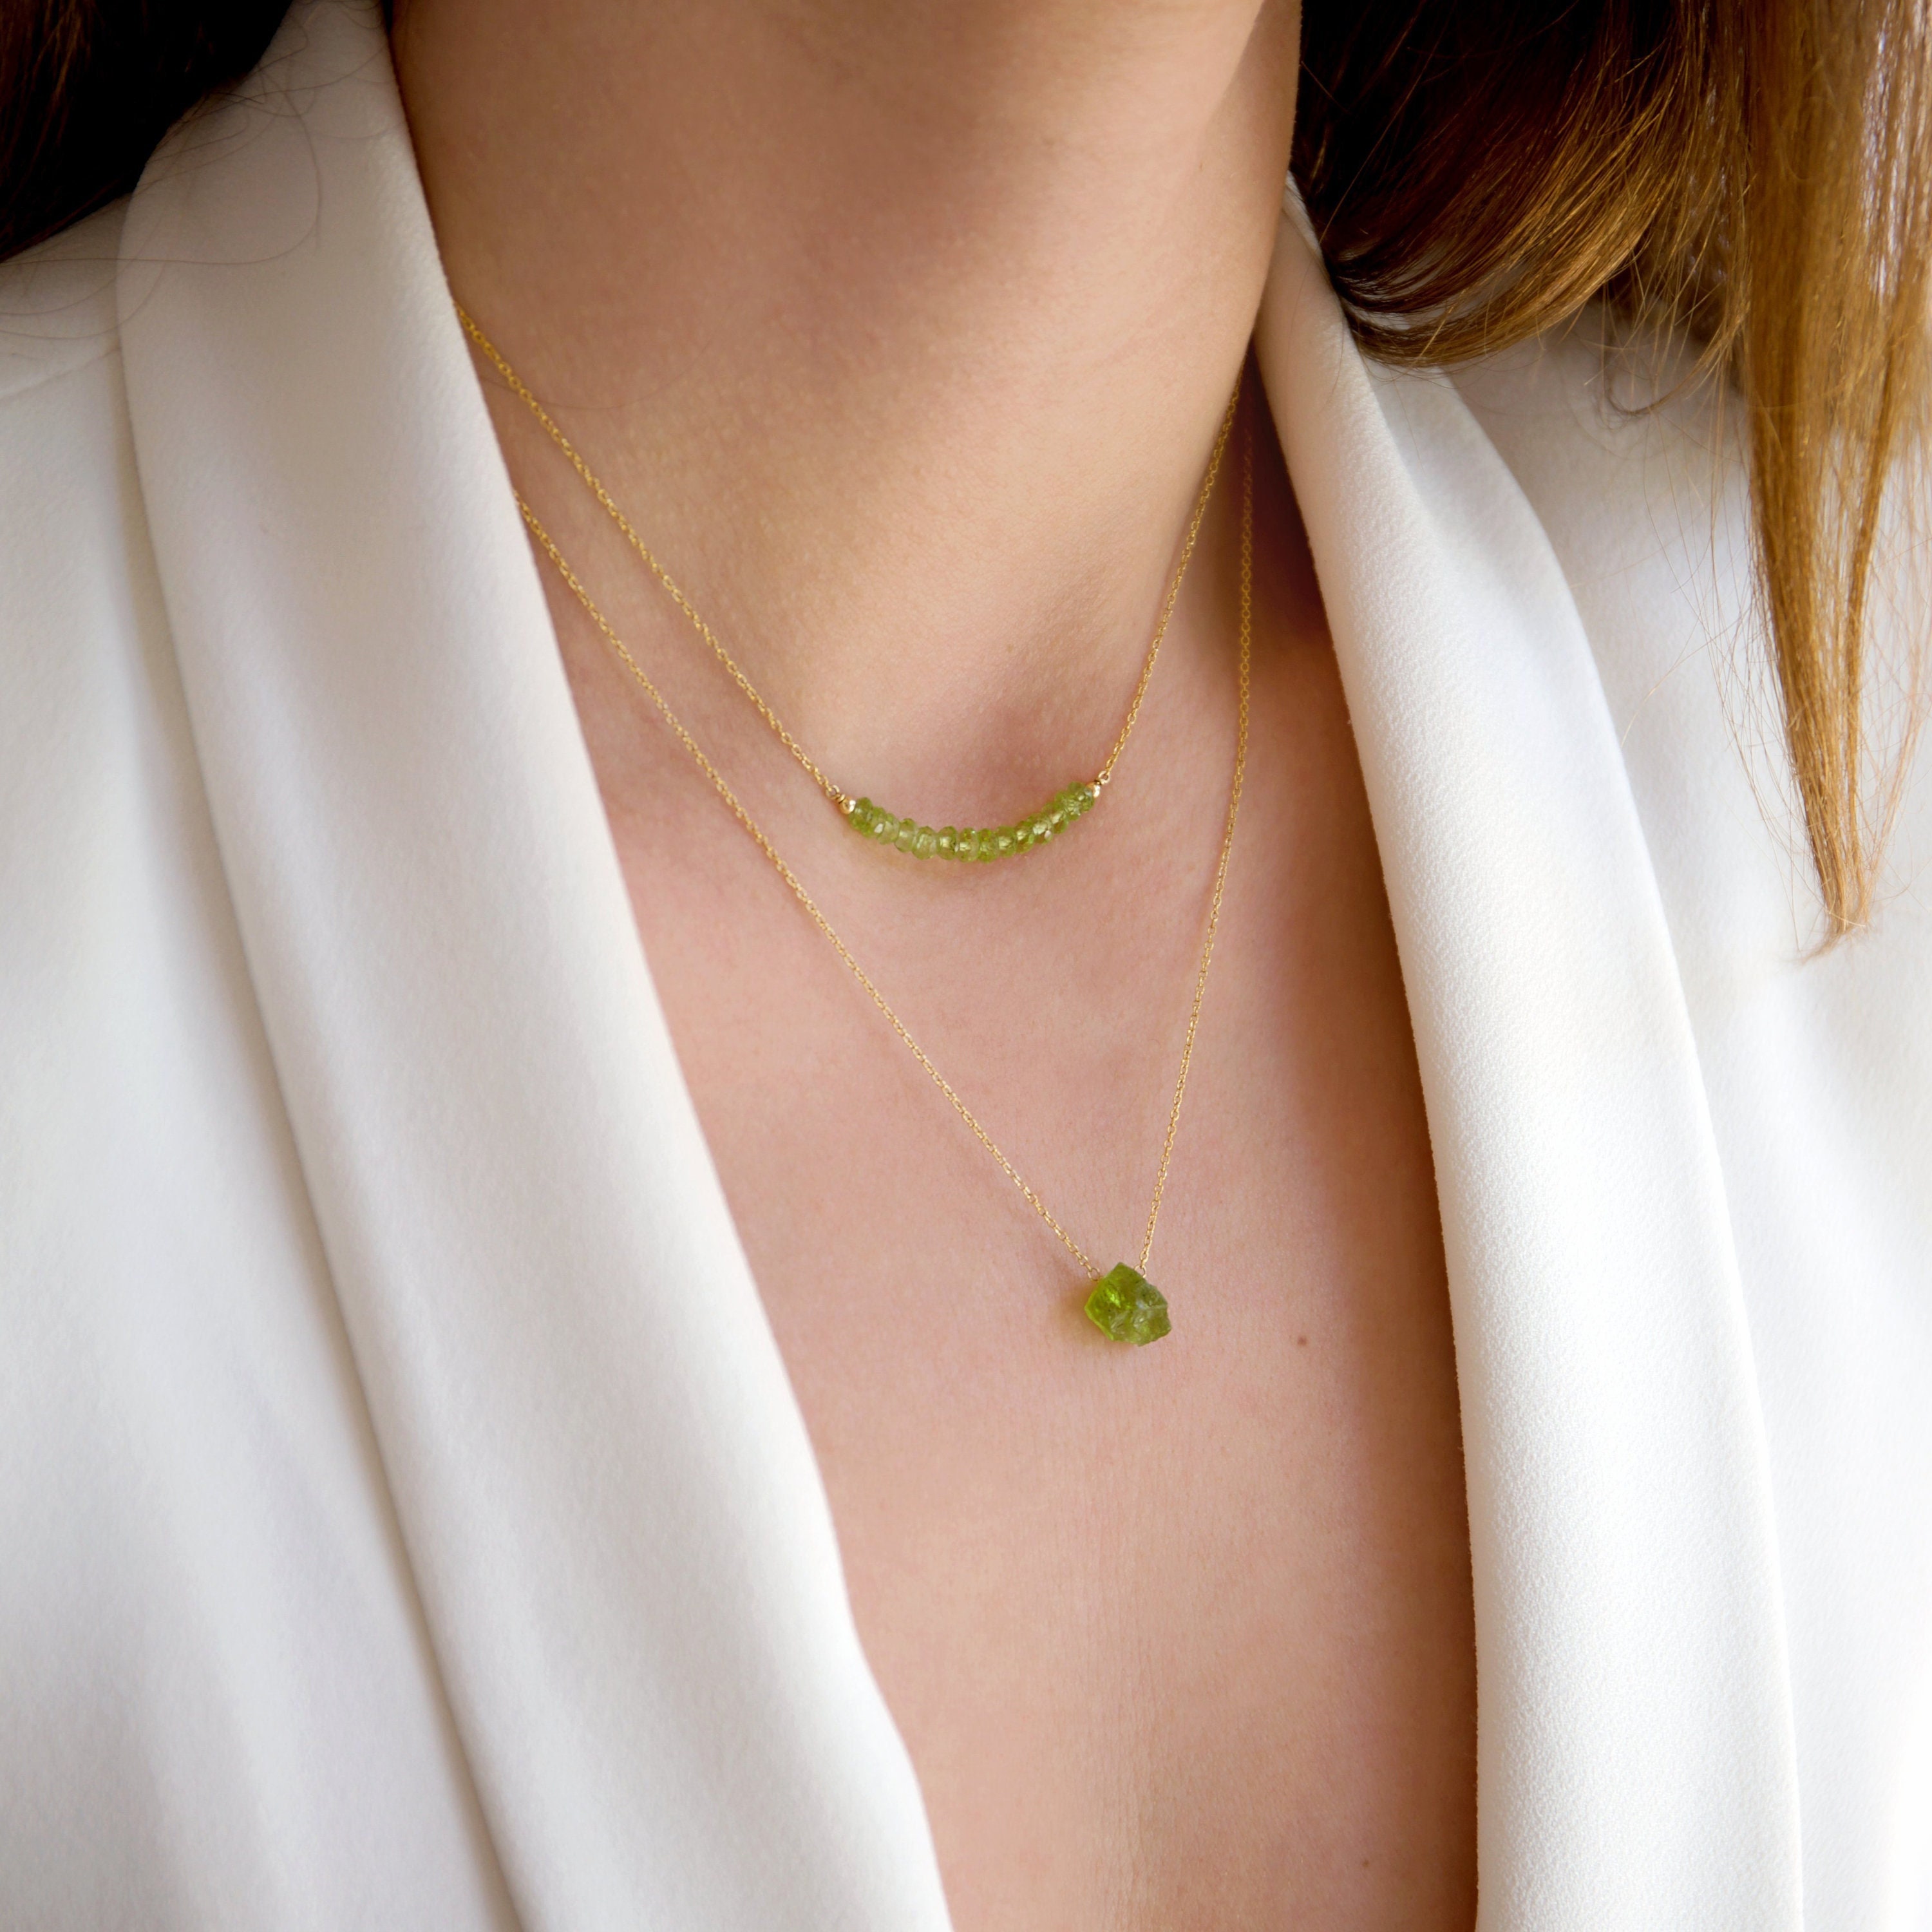 Gempires Natural Raw Peridot Pendant, August Birthstone Necklace, Raw  Crystal Jewellery, 16 + 2 Inch Adjustable 14k Gold Plated Chain :  Amazon.co.uk: Handmade Products